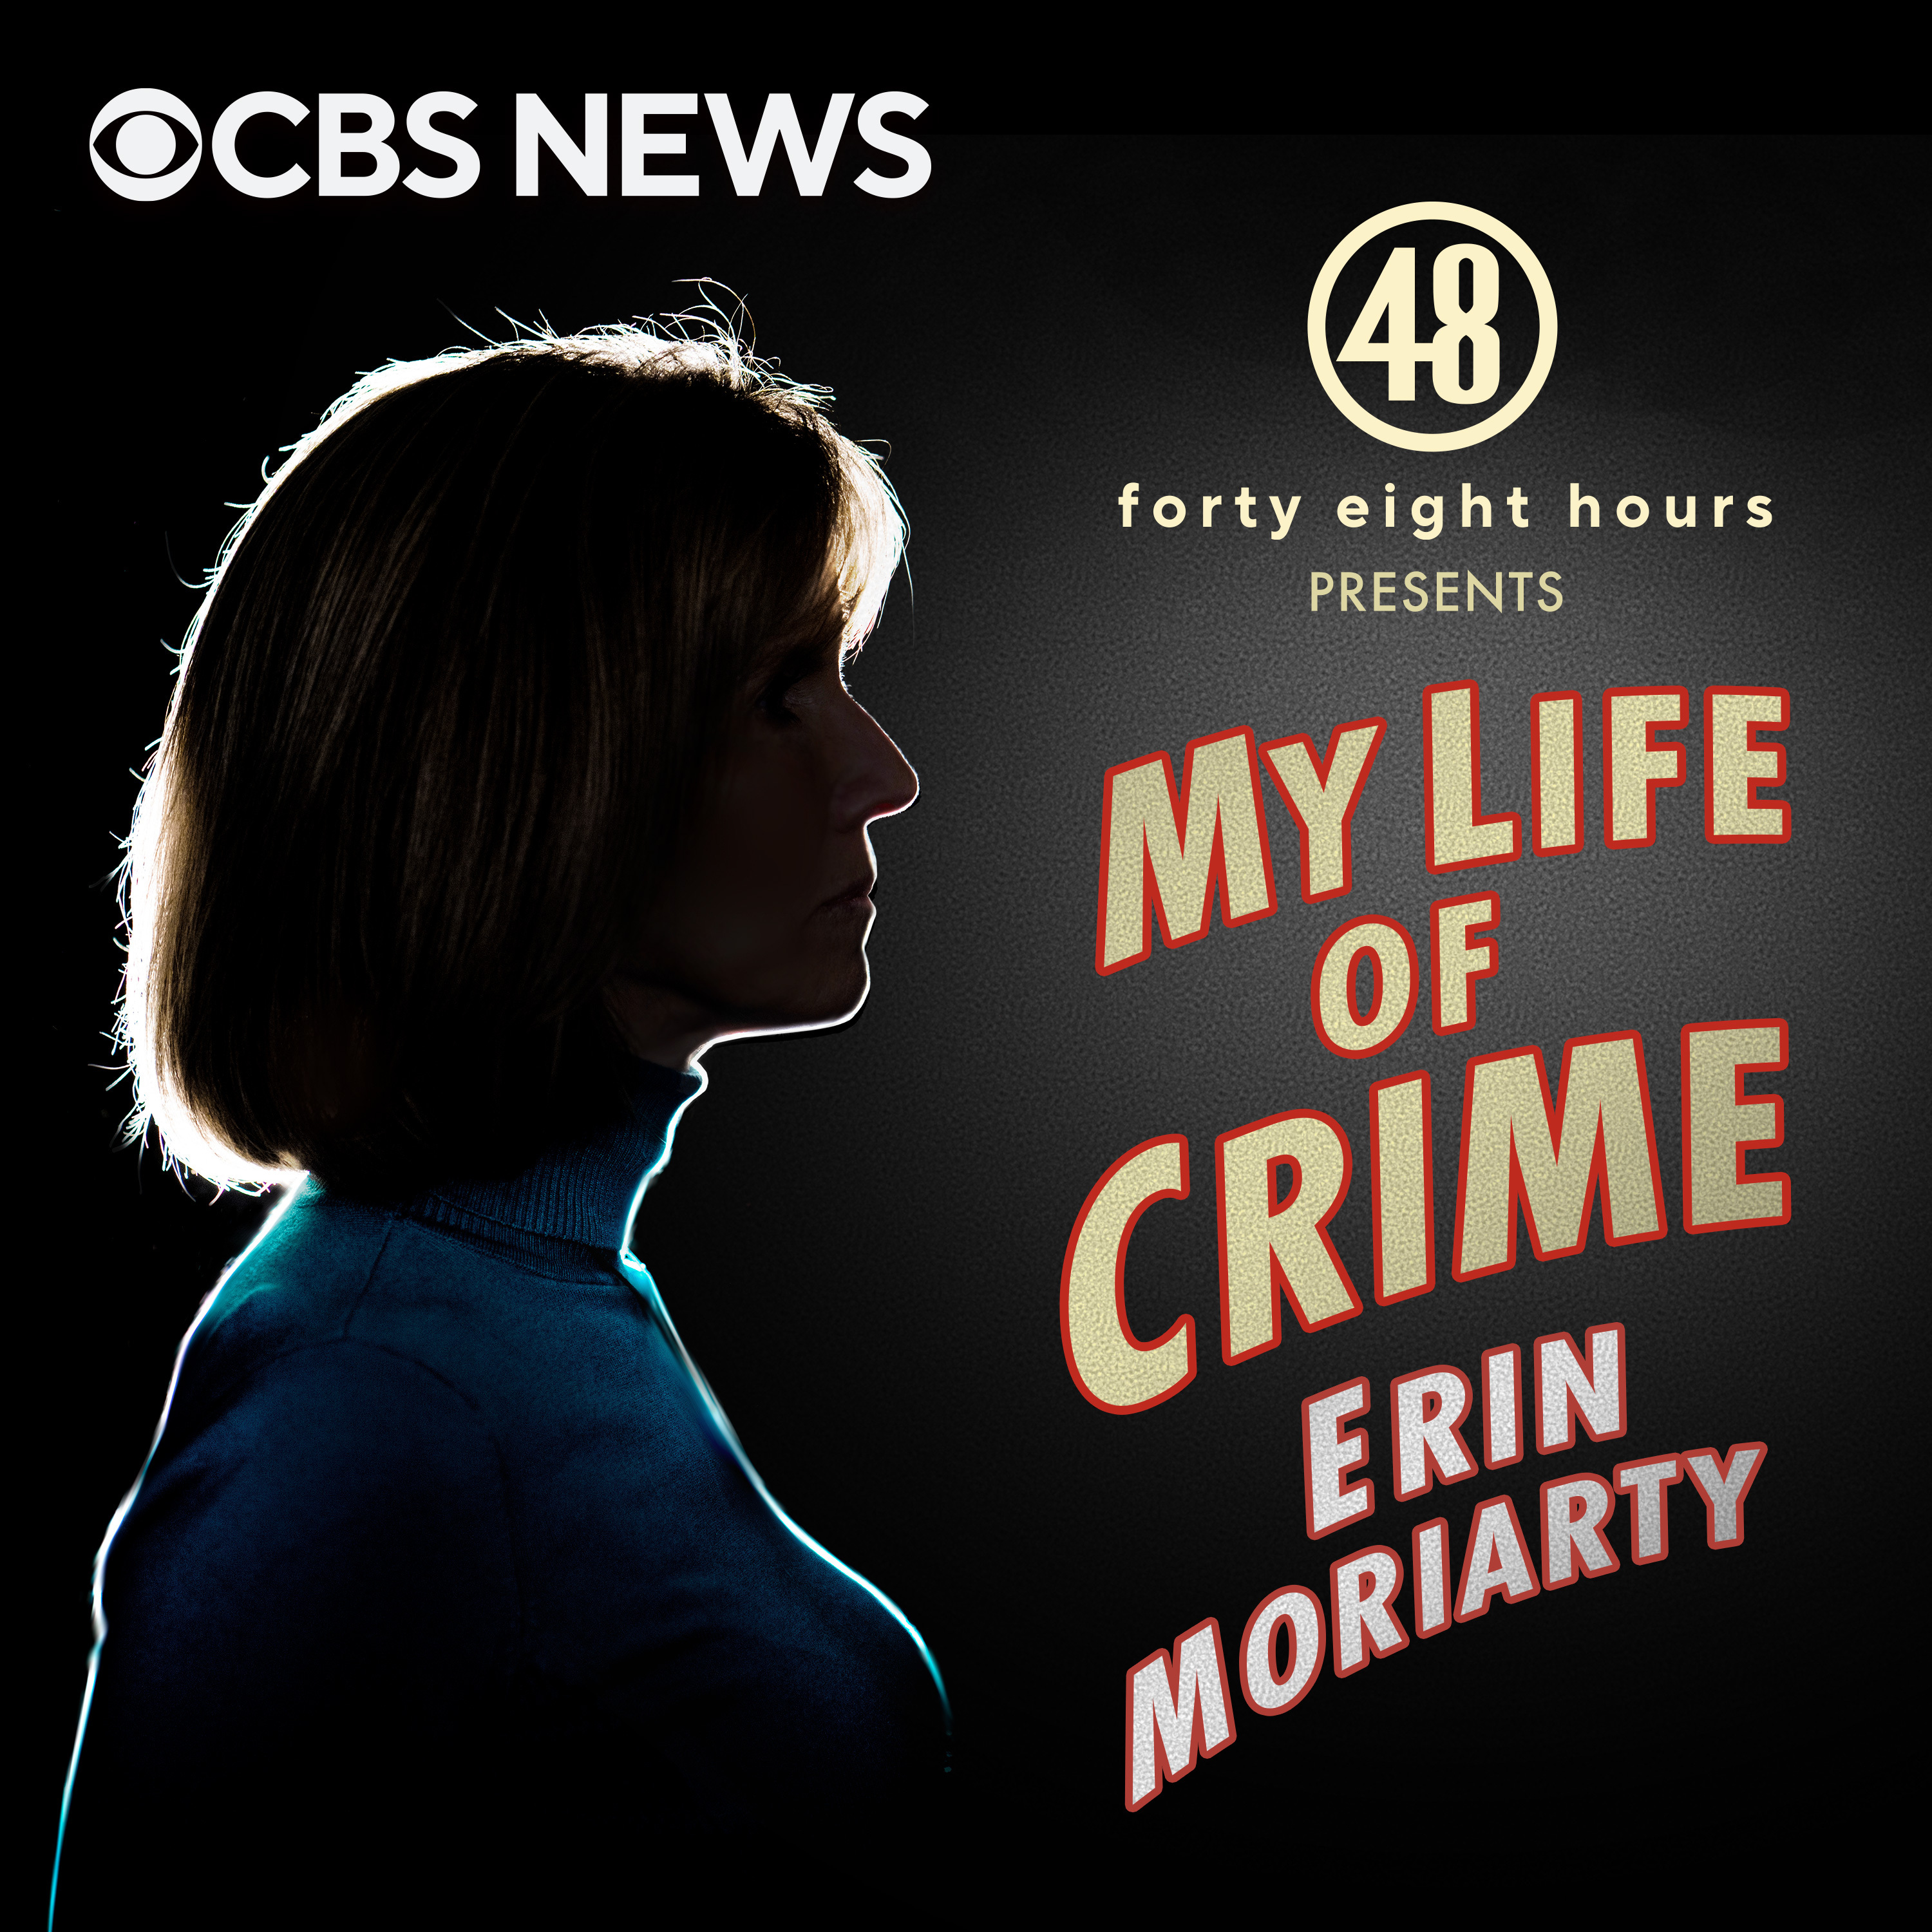 Victim or Abuser: The Interview with Tracey Grissom | My Life of Crime by CBS News